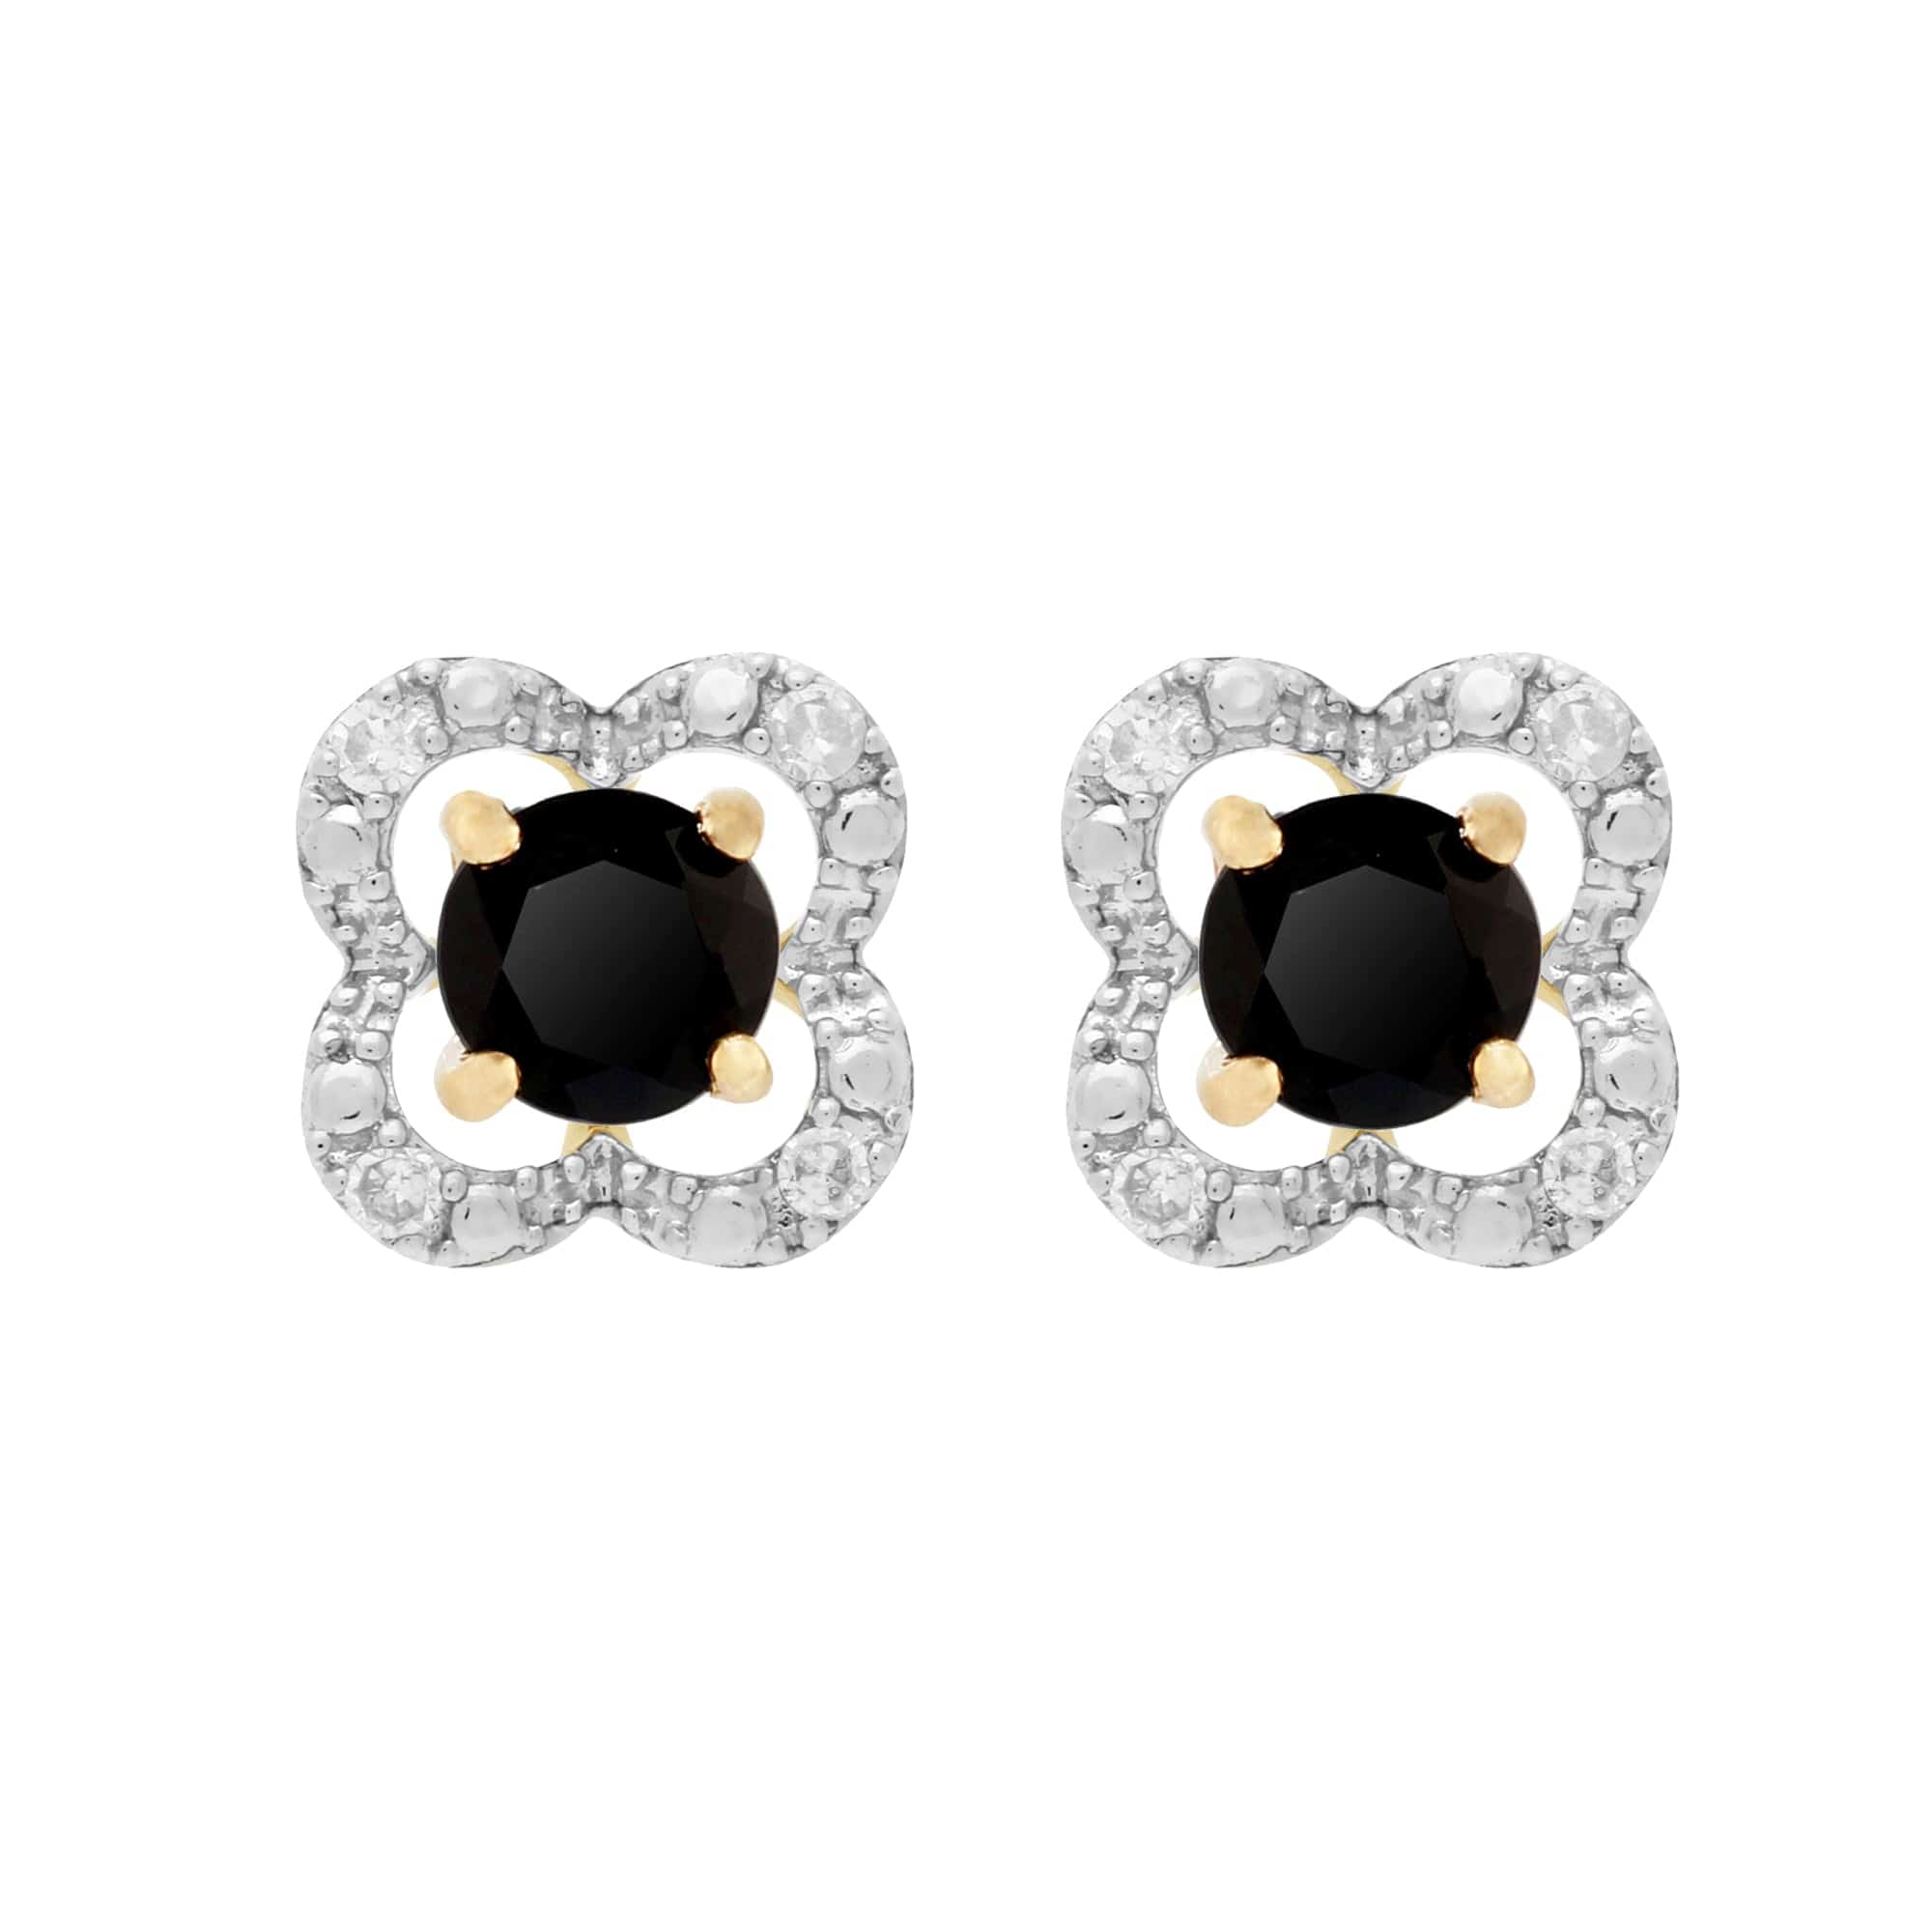 183E0083339-191E0375019 Classic Round Black Onyx Studs with Detachable Diamond Floral Ear Jacket in 9ct Yellow Gold 1